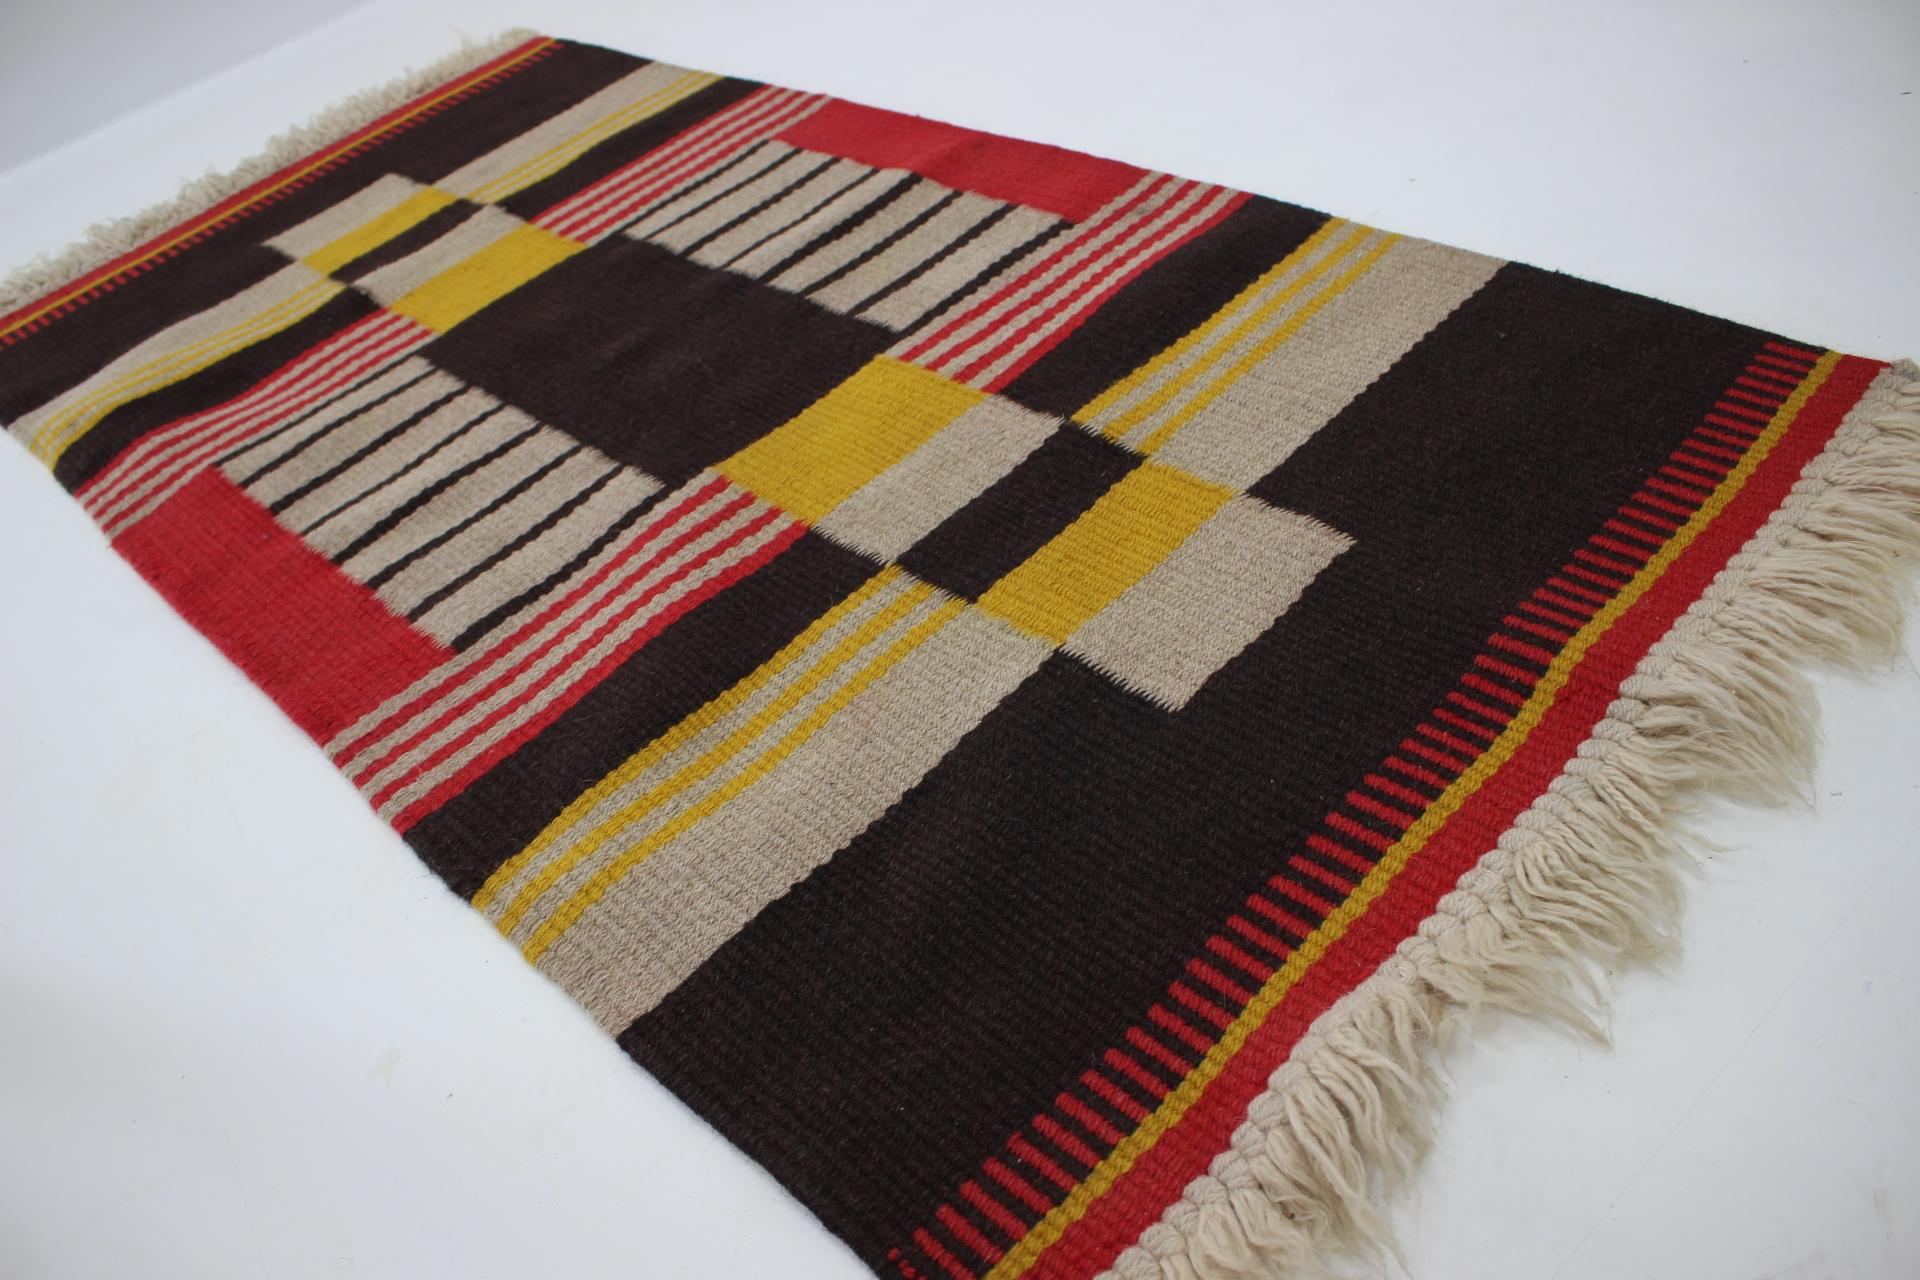 Woven Small Geometric Wool Kilim Carpet Designed by Antonin Kybal, 1940s For Sale